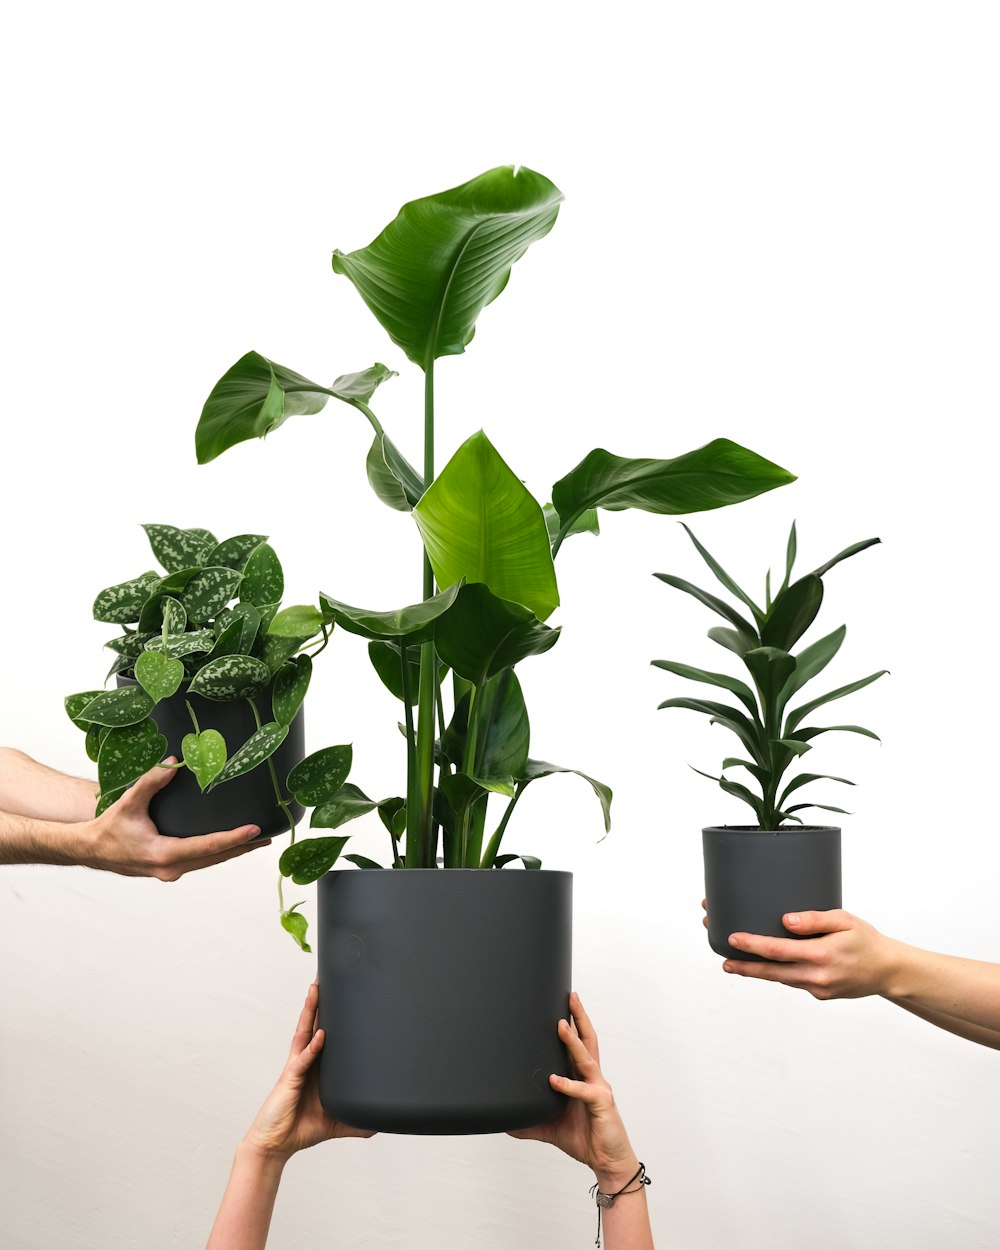 hands holding a tablet and a plant